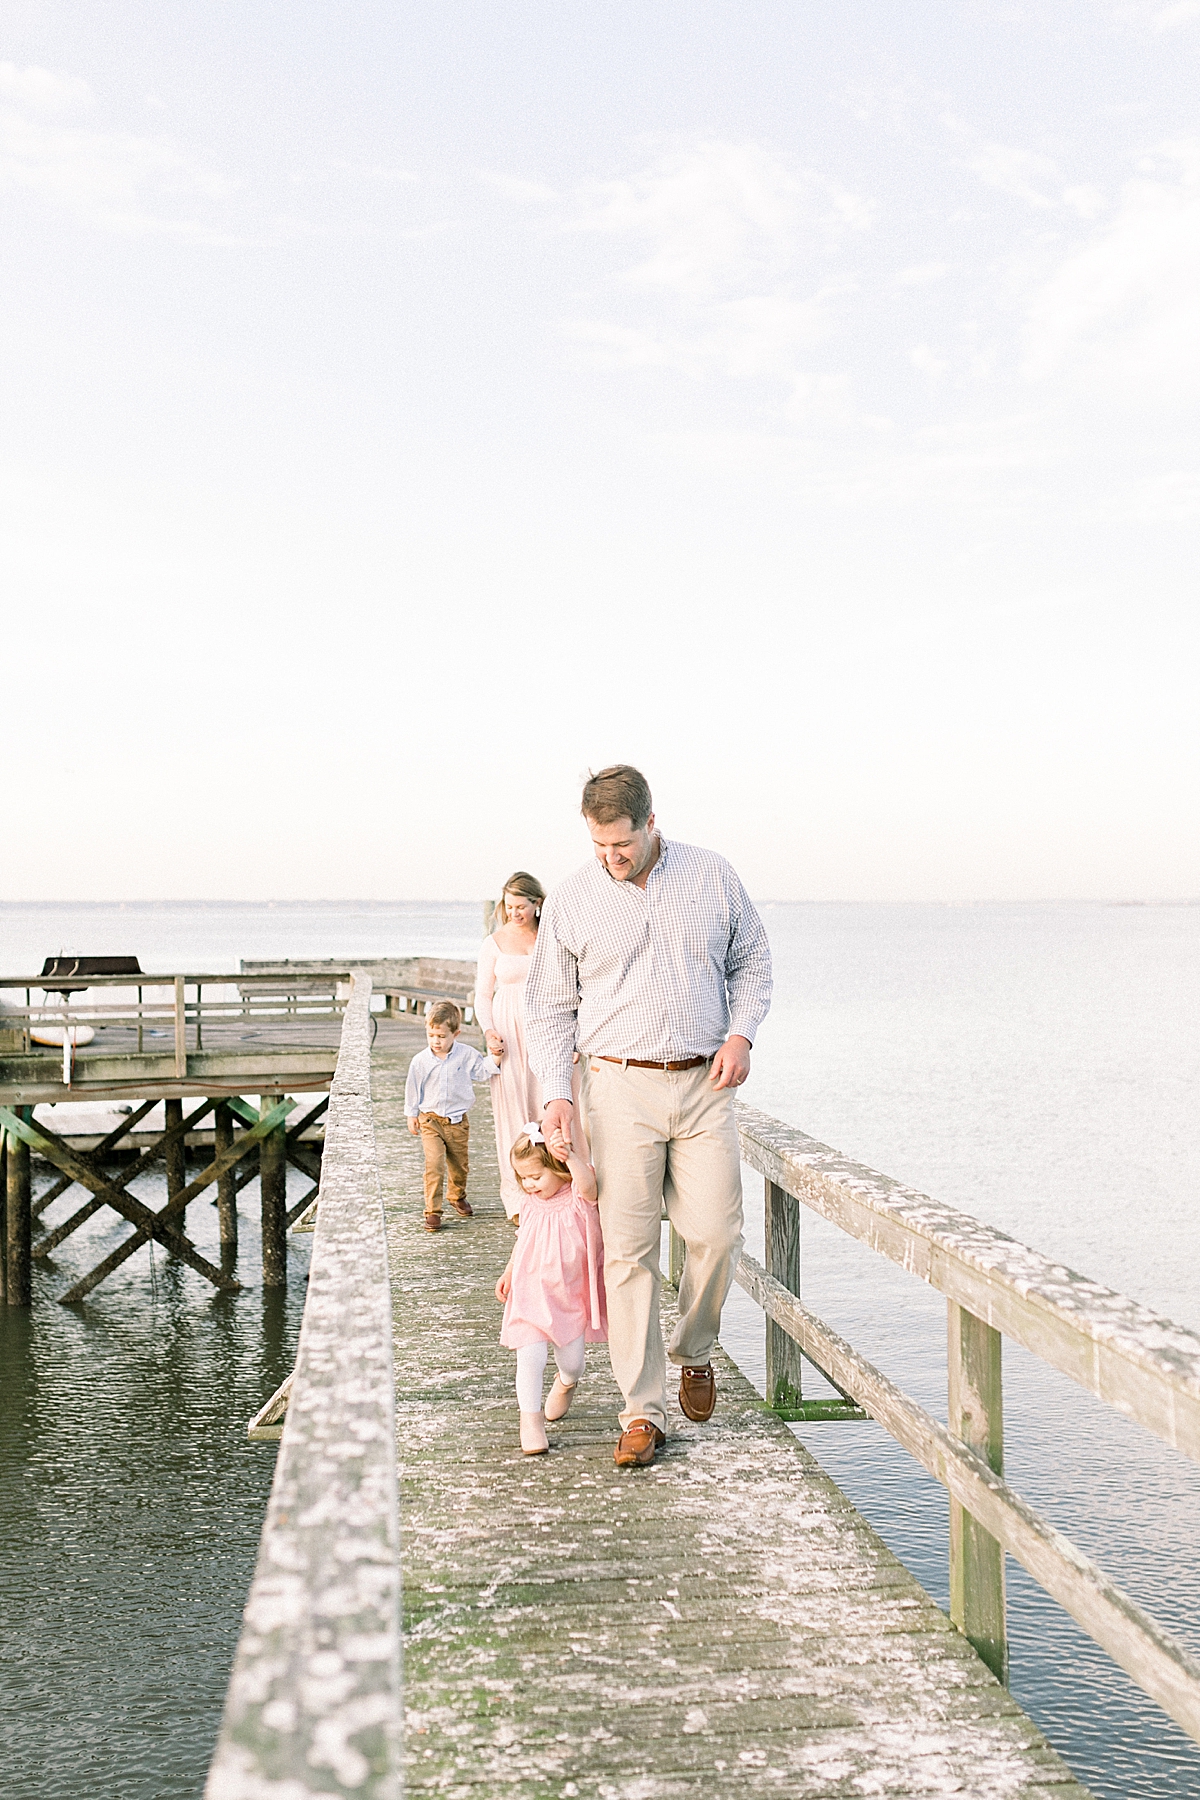 Family photoshoot on dock in the Old Village district of Mount Pleasant. Photos by Caitlyn Motycka Photography.